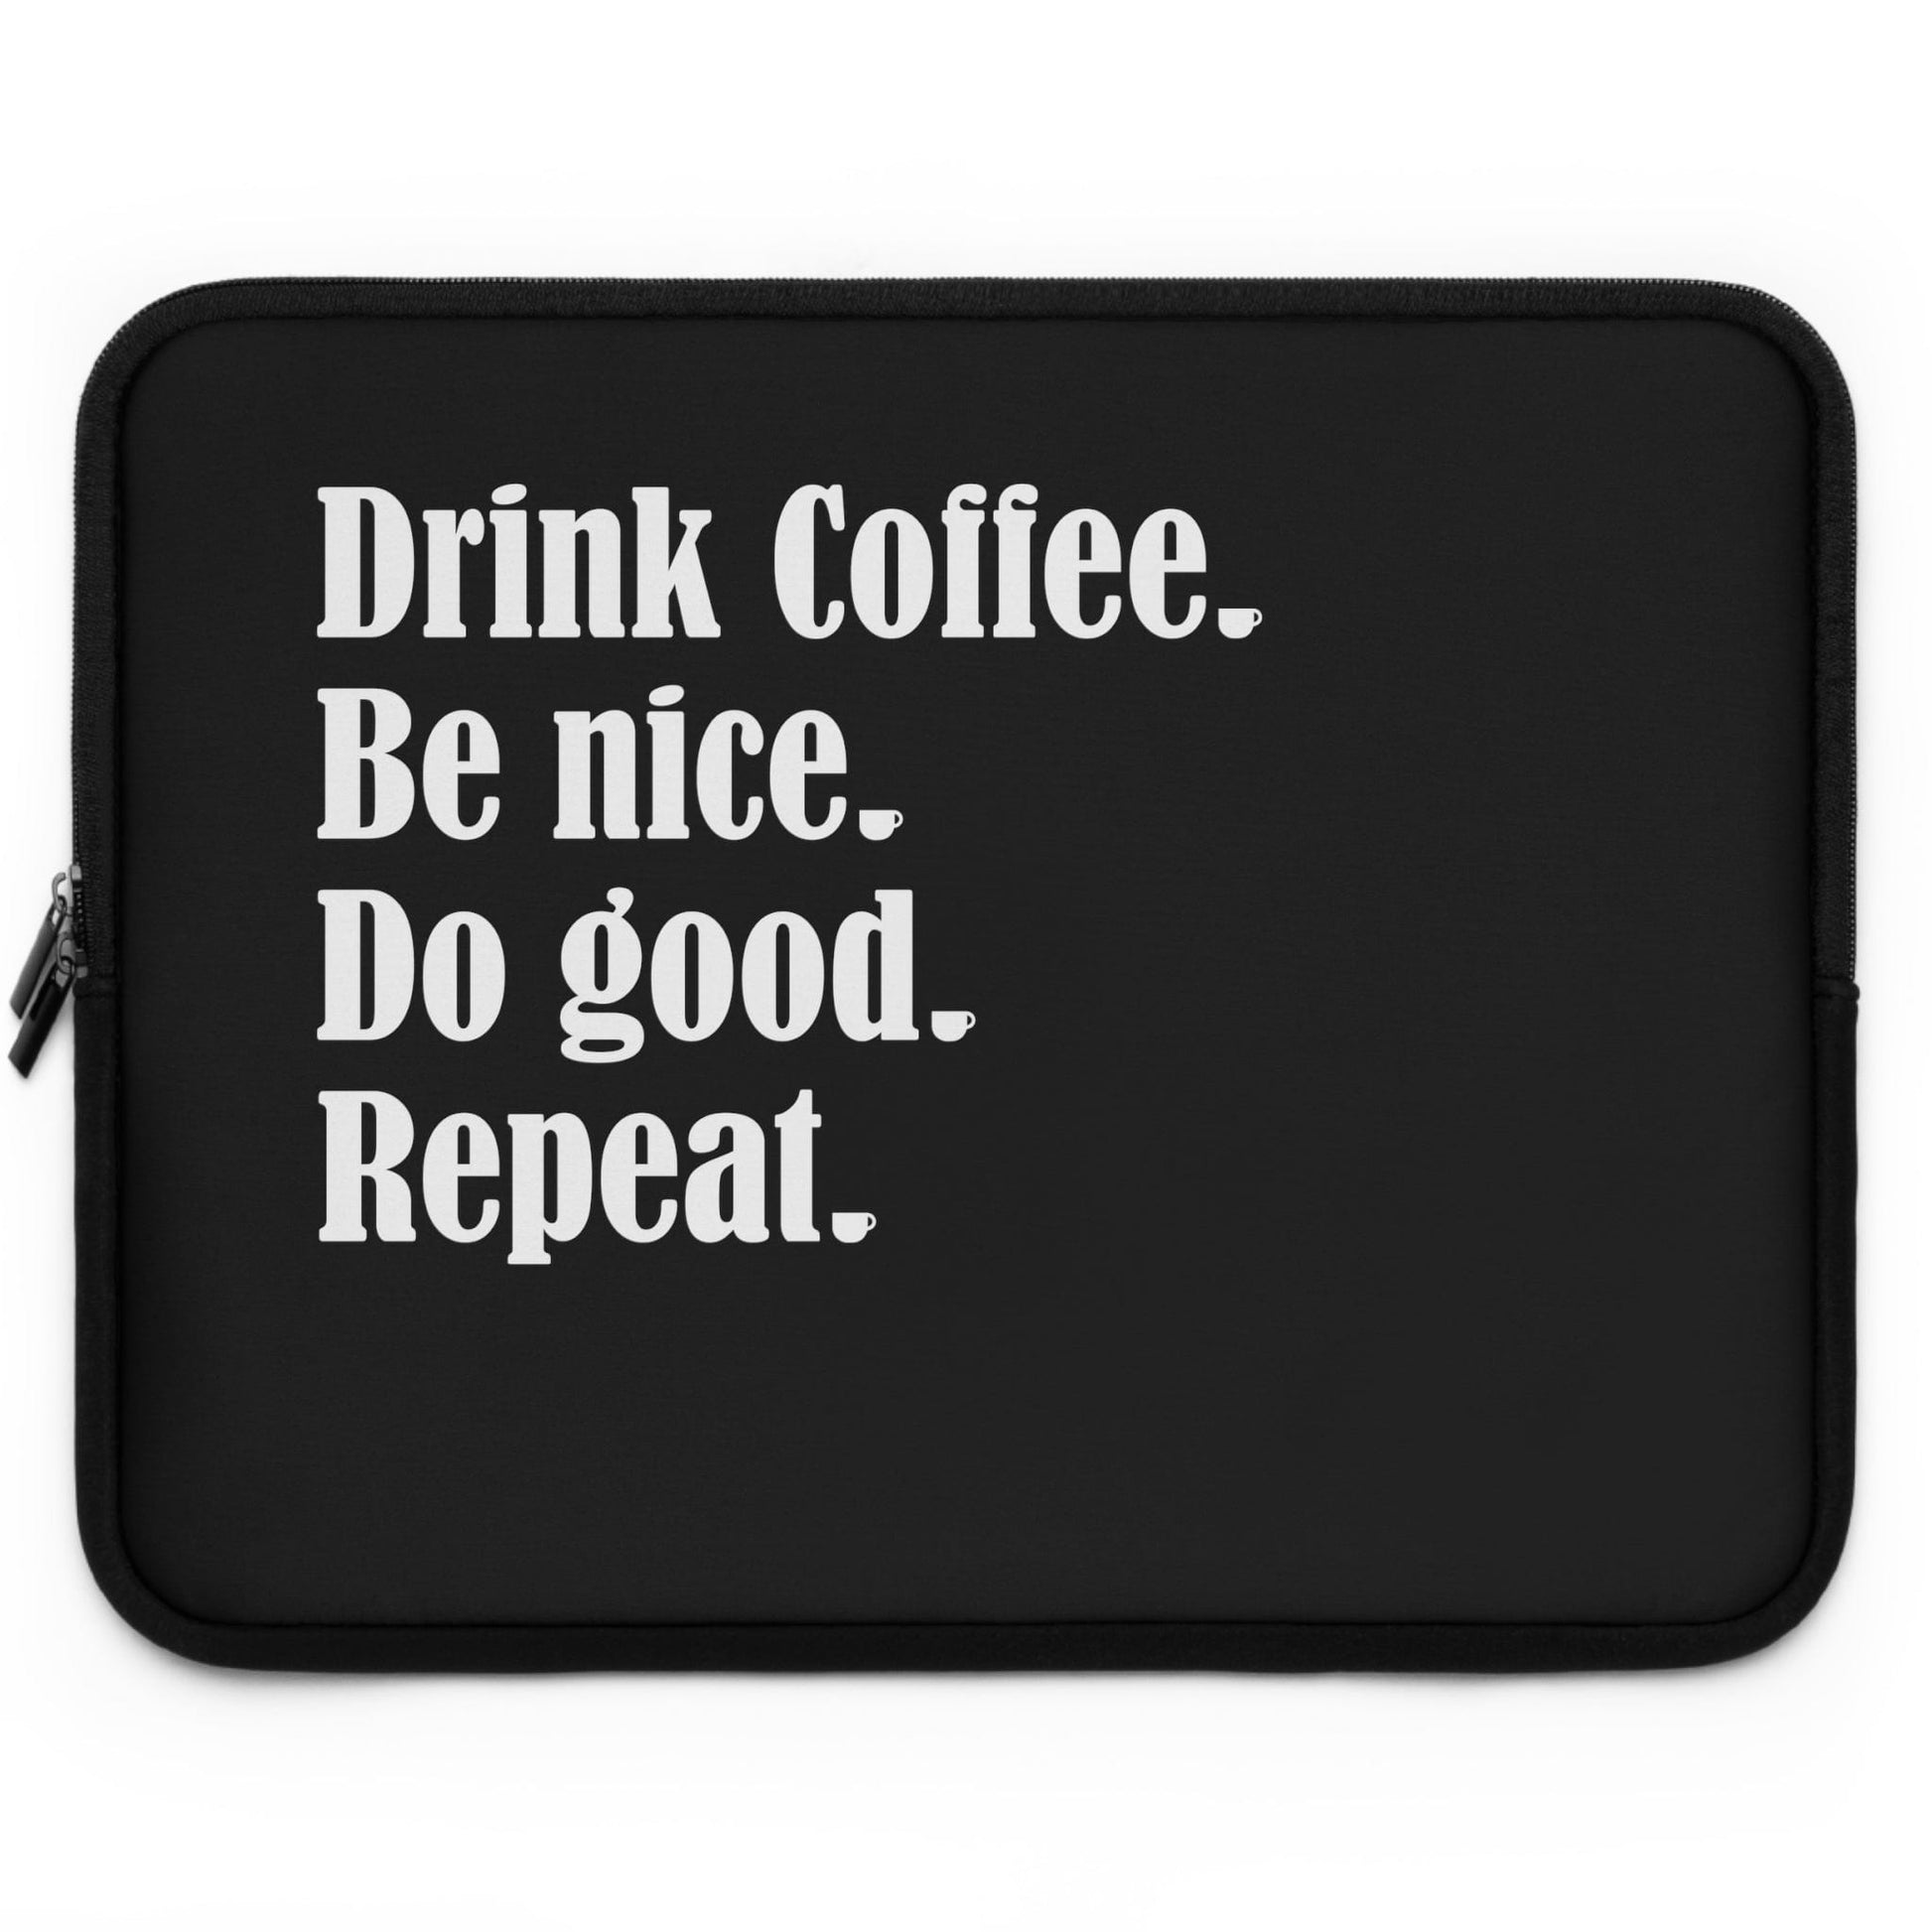 Good Bean Gifts "Drink Coffee, Be Nice, Do Good, Repeat" Laptop Sleeve Black / 17"